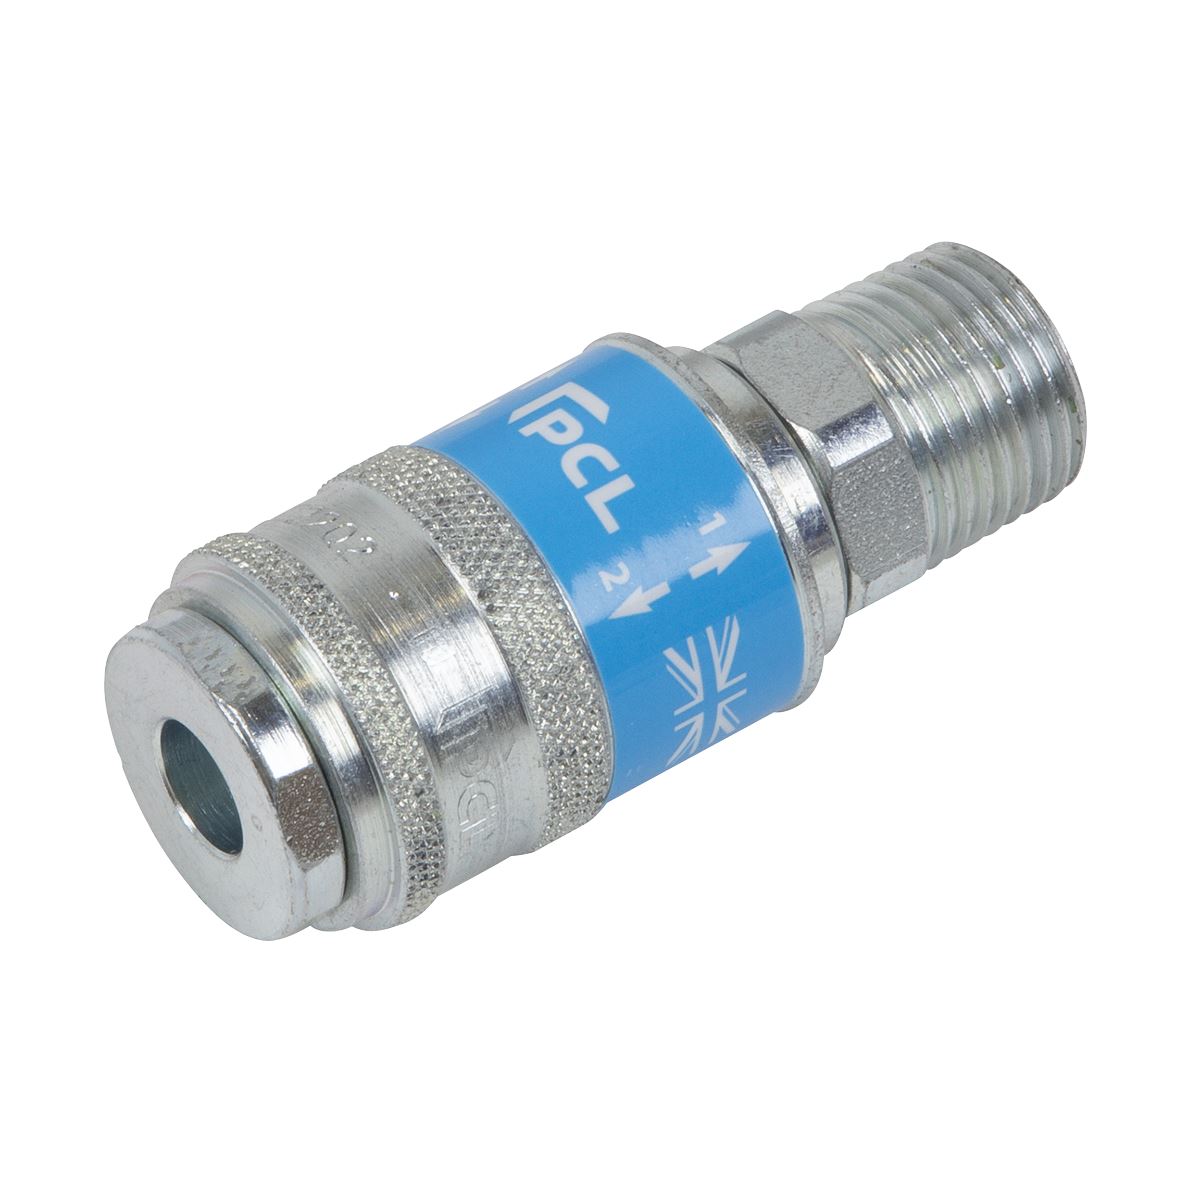 PCL Safeflow Safety Coupling Body Male 1/2"BSPT